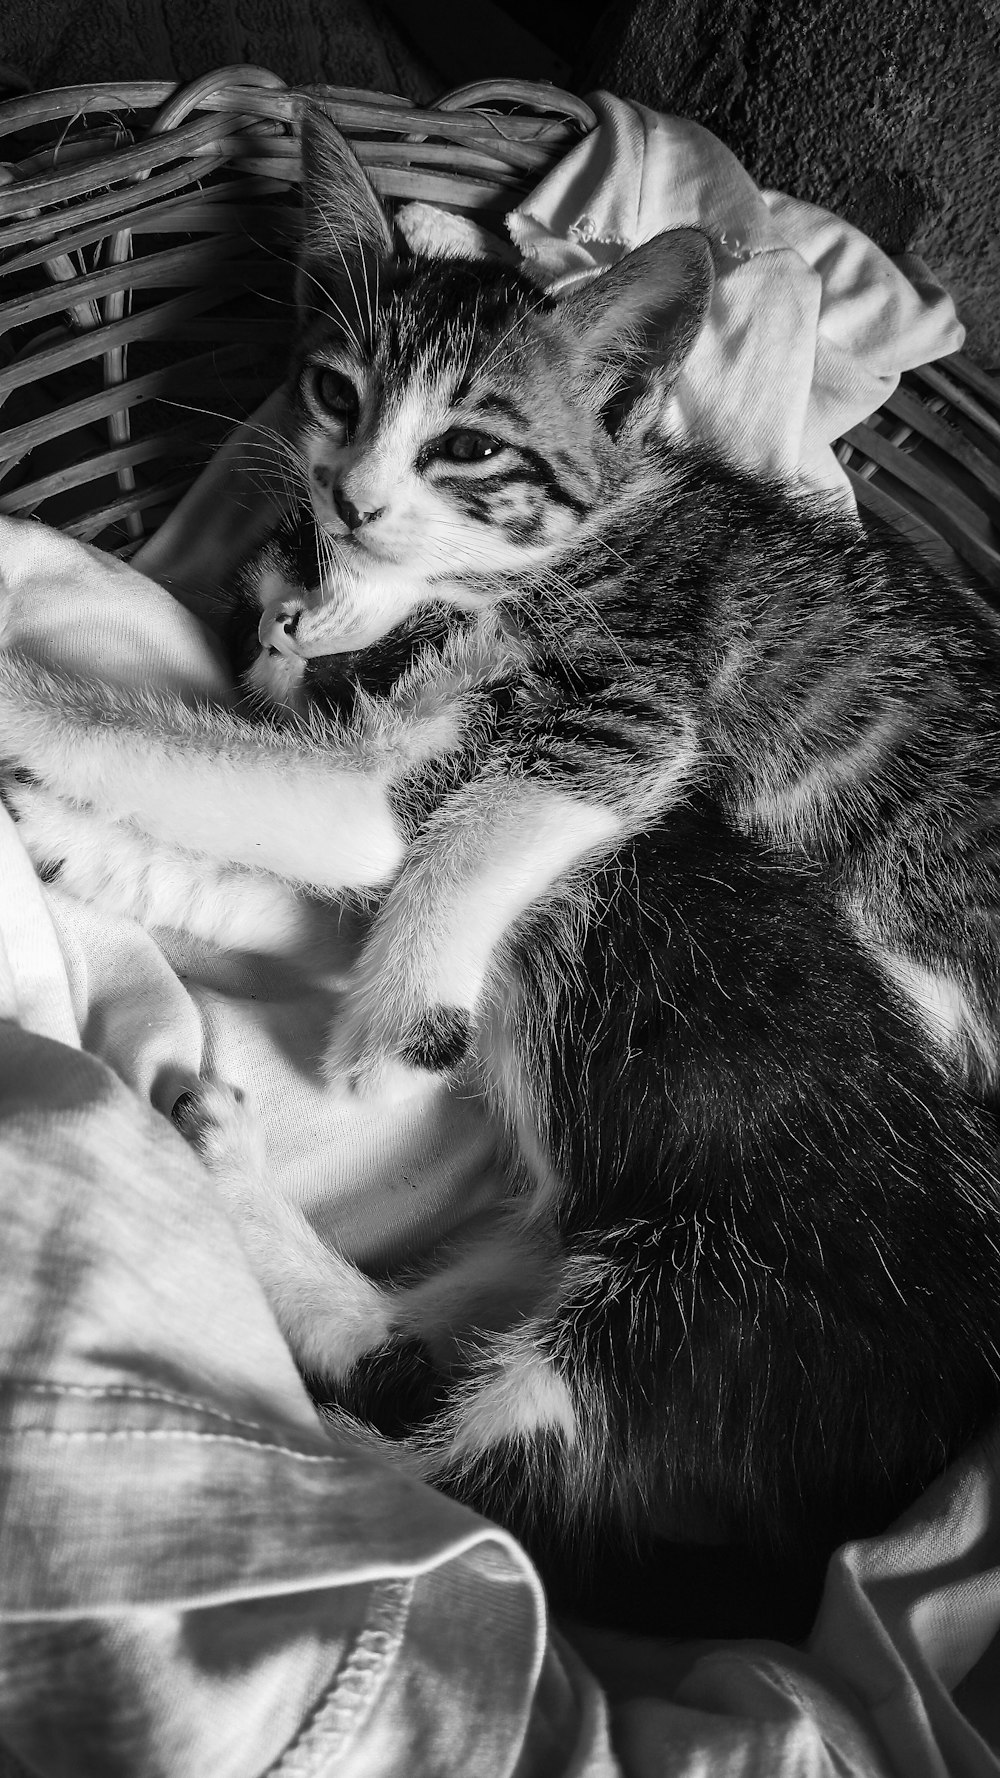 grayscale photo of tabby kitten on white textile